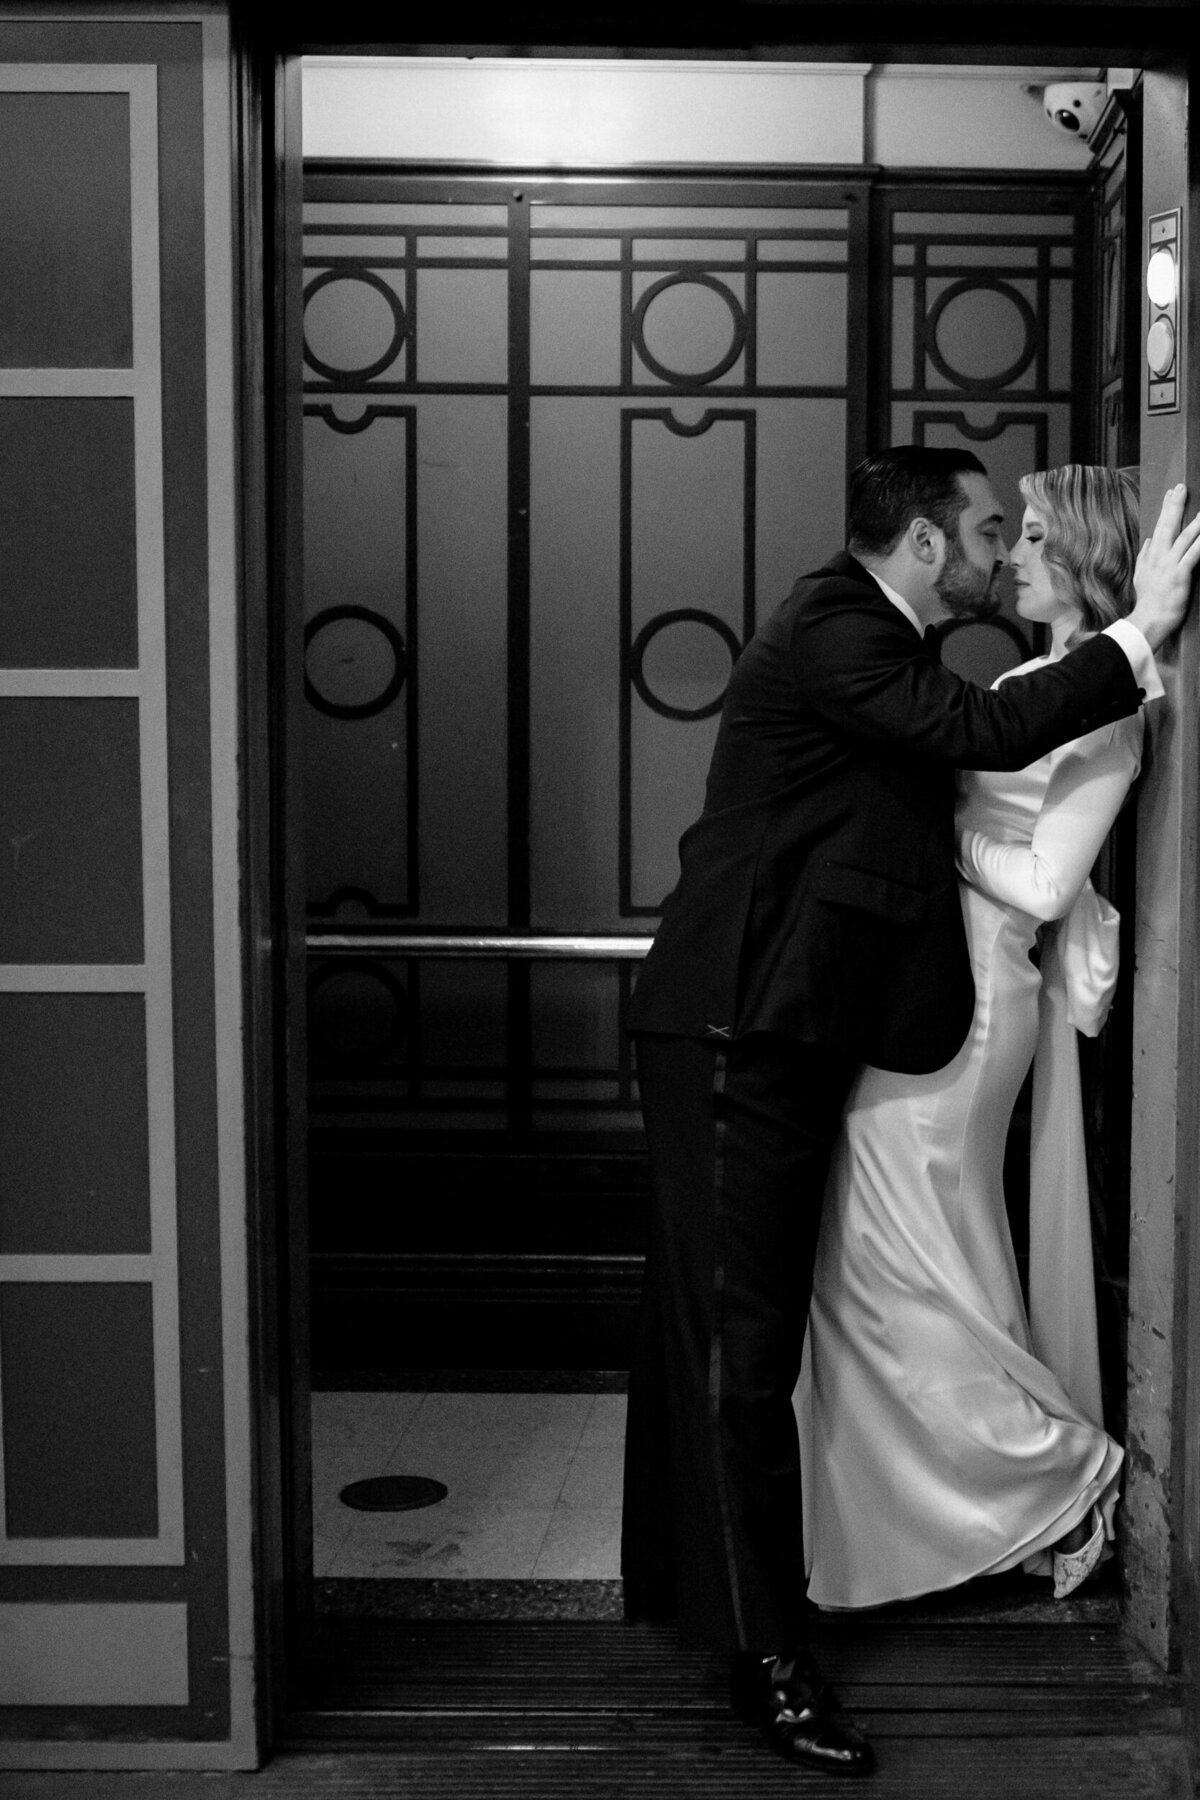 Bride and Groom kissing inside of an elevator after their elopement.